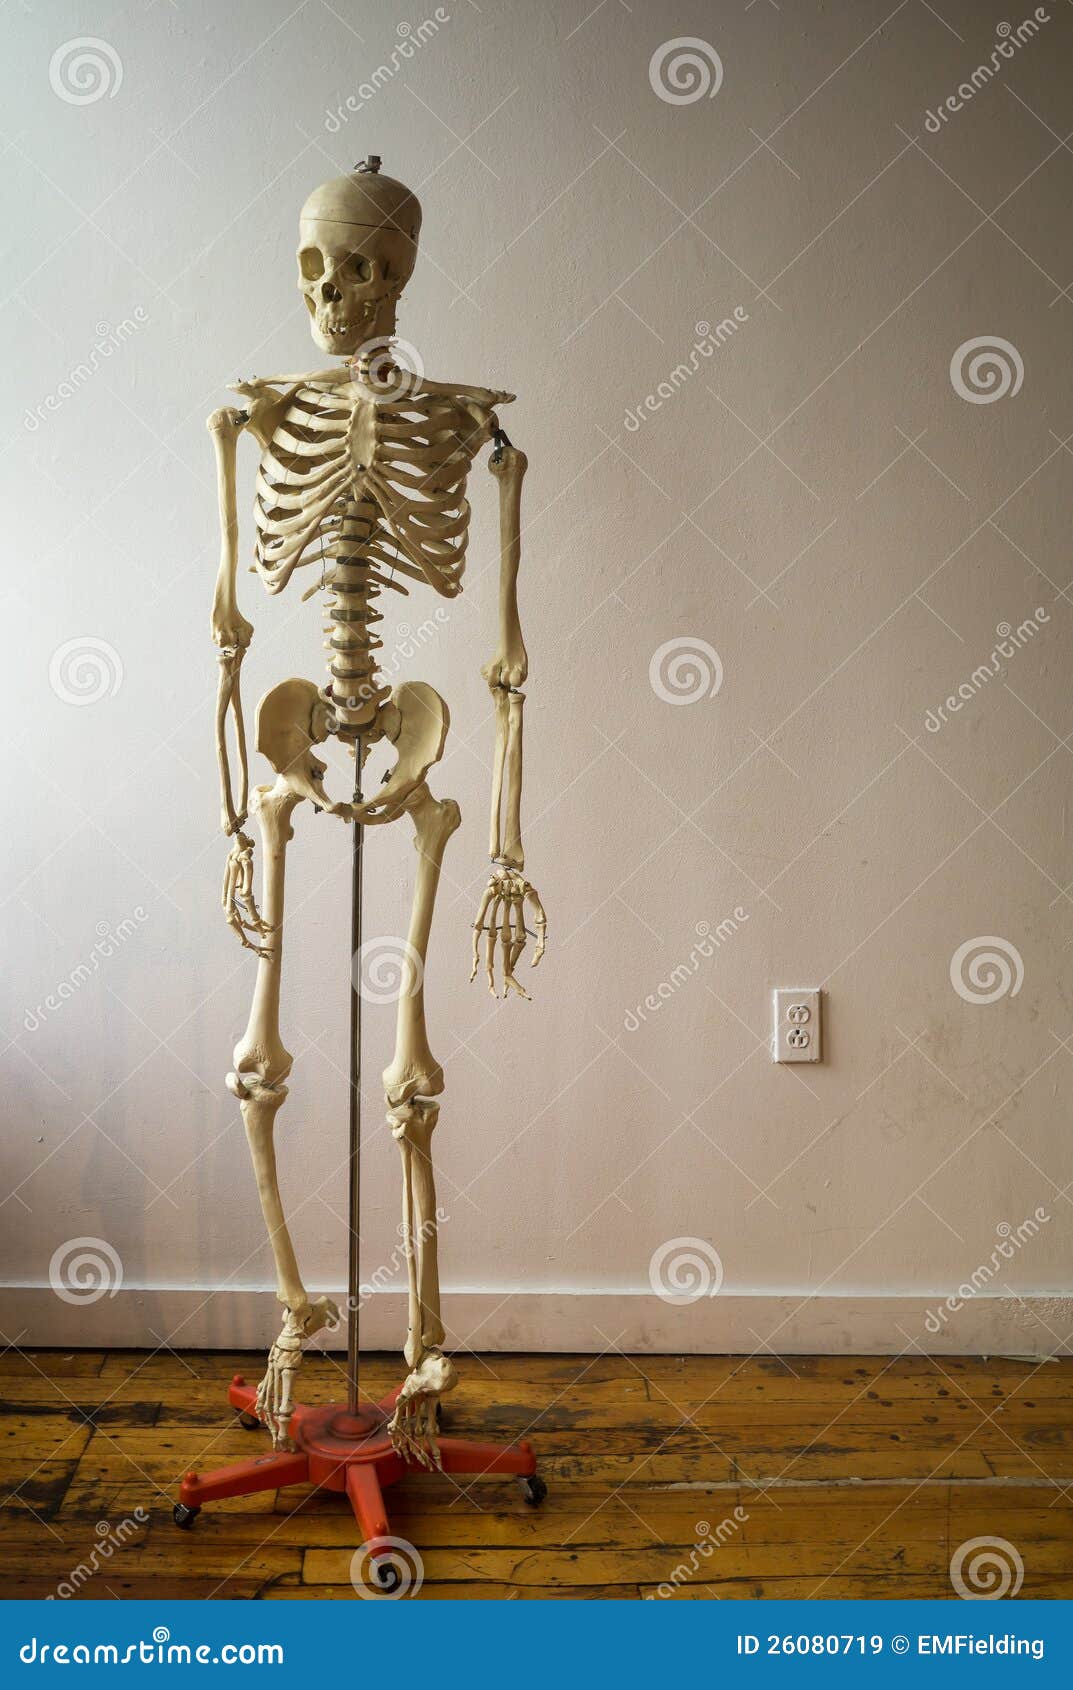 Human Skeleton In Classroom Royalty Free Stock Images - Image: 26080719